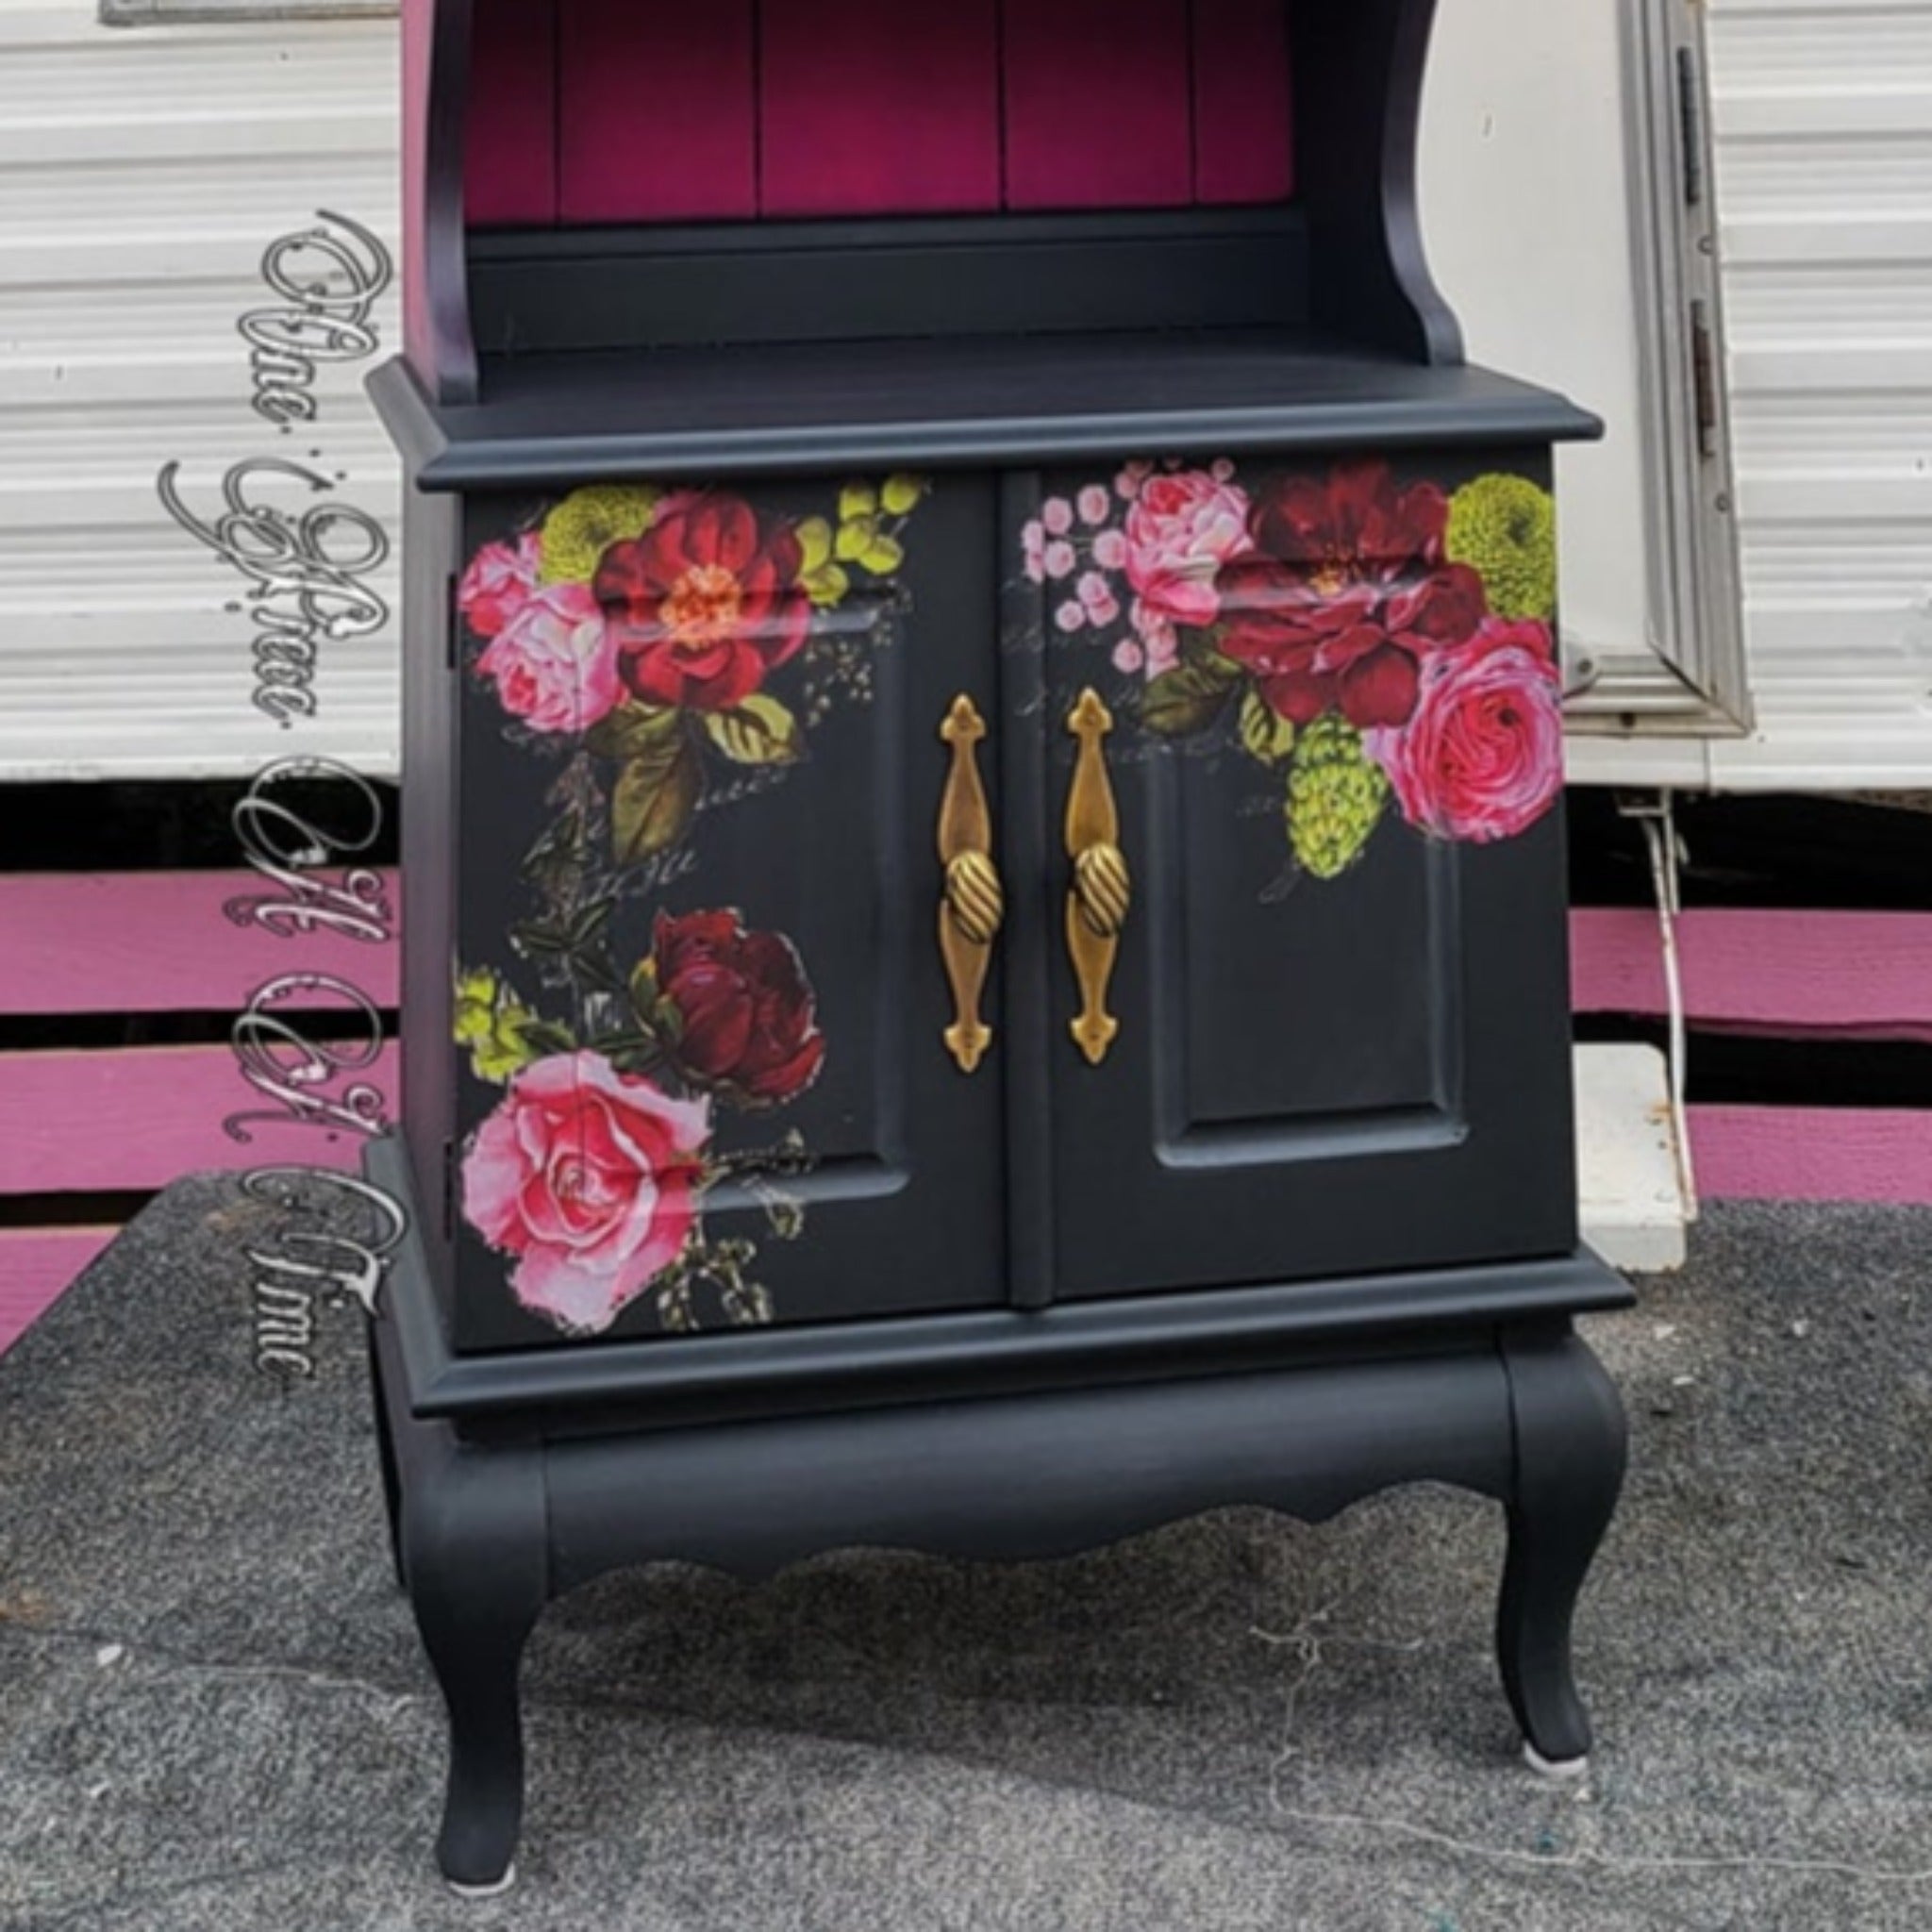 A vintage French Provencial hutch refurbished by One Piece At A Time is painted black and deep pink and features ReDesign with Prima's Royal Burgundy transfer on its bottom 2 doors.